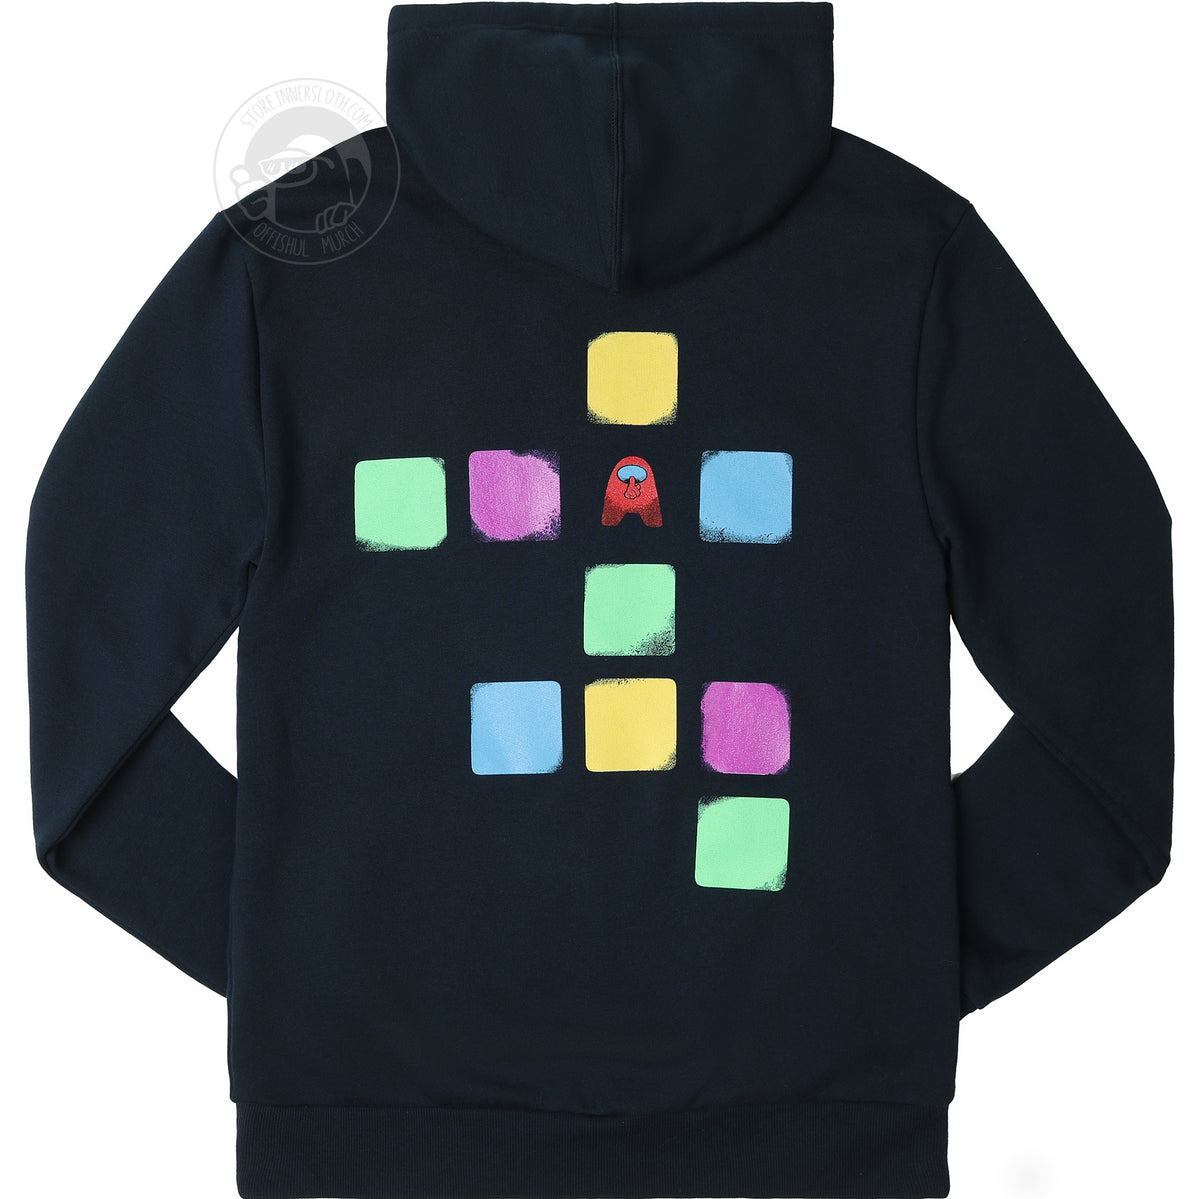 A product photo of the back of the Among Us: Cosmicube Hoodie. Colorful squares are laid out in the template one would use to create a 3D cube from paper. One of the squares has been replaced with a red crewmate making the “Shh!” motion.